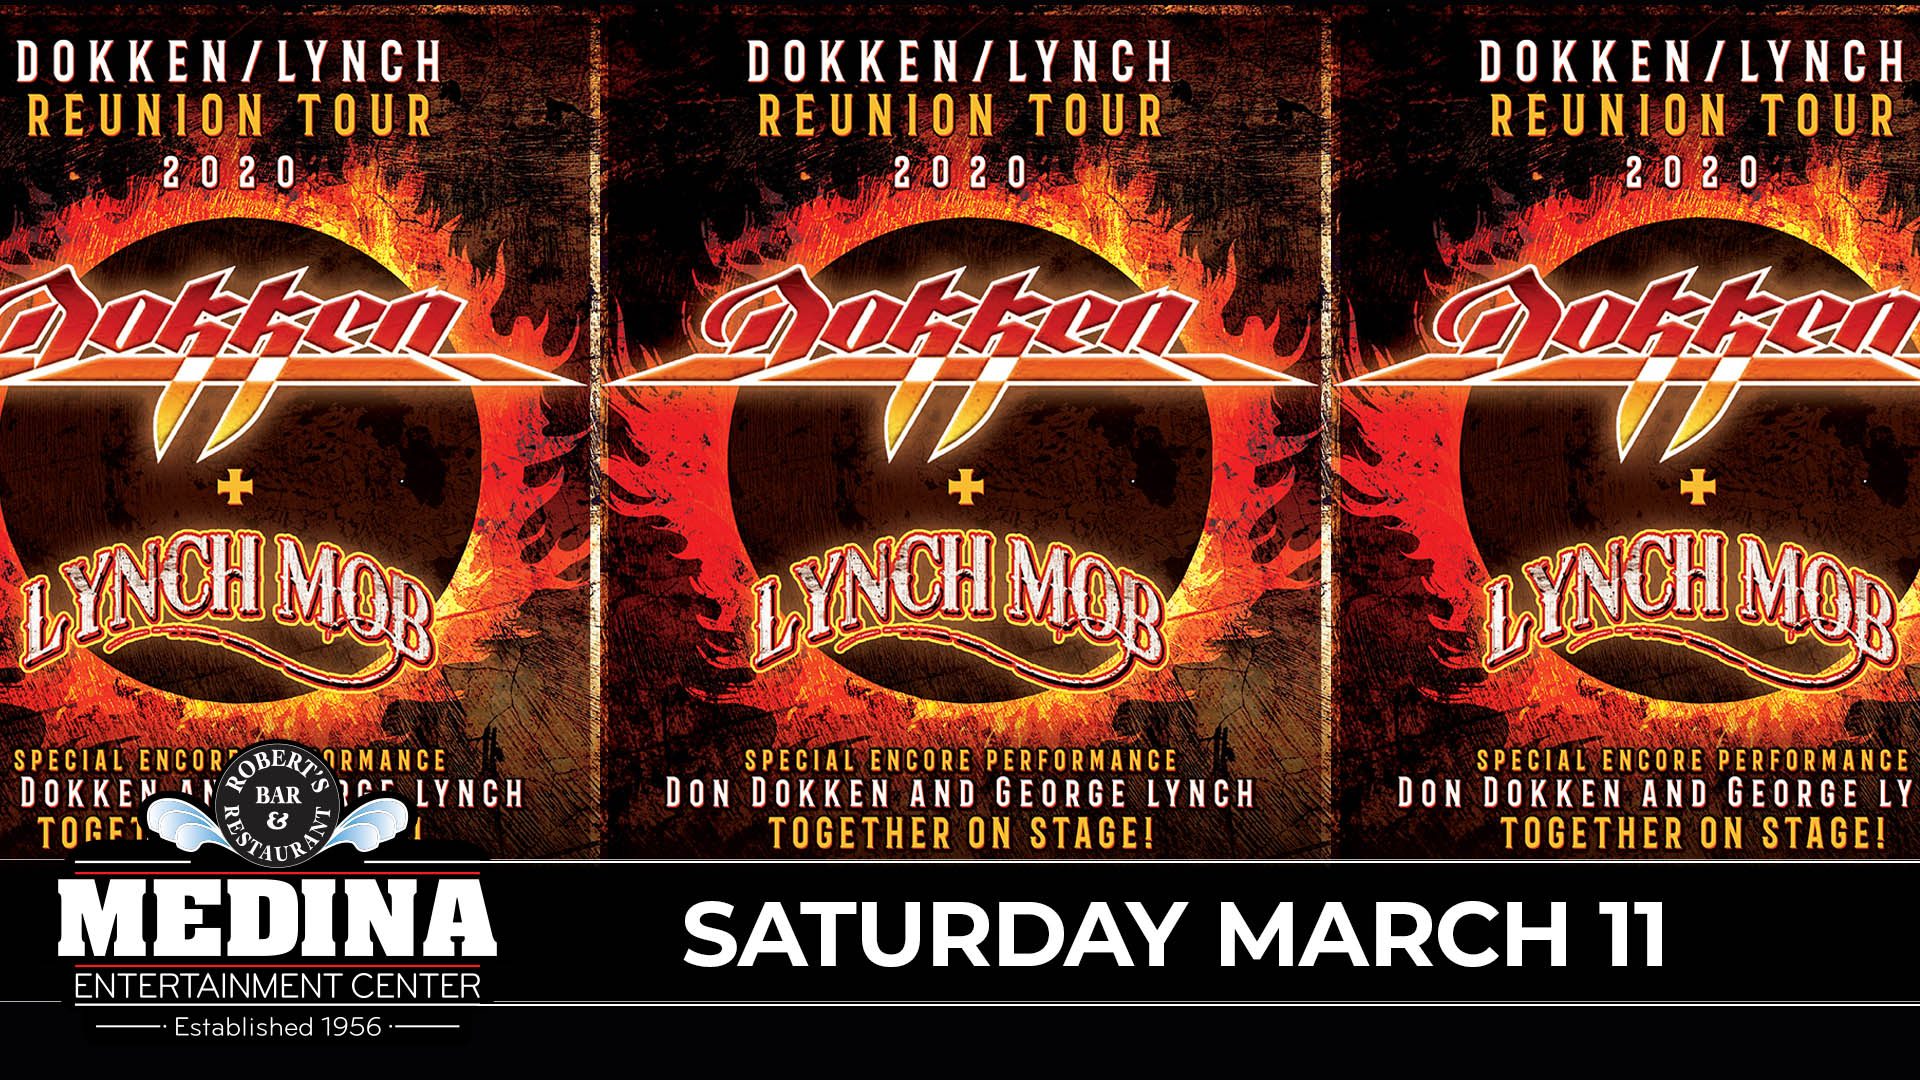 DOKKEN + LYNCH MOB with special encore performance Don Dokken & George Lynch Together On Stage! Medina Entertainment Center SAturday, March 11, 2023 Doors: 7:00PM | Music: 8:00PM | 21+ Tickets on-sale Friday, December 16 at 11am Ticket Prices: $53.00 (Gold Seating), $48.00 (Silver Seating) & $43.00 (GA Seating) plus applicable fees